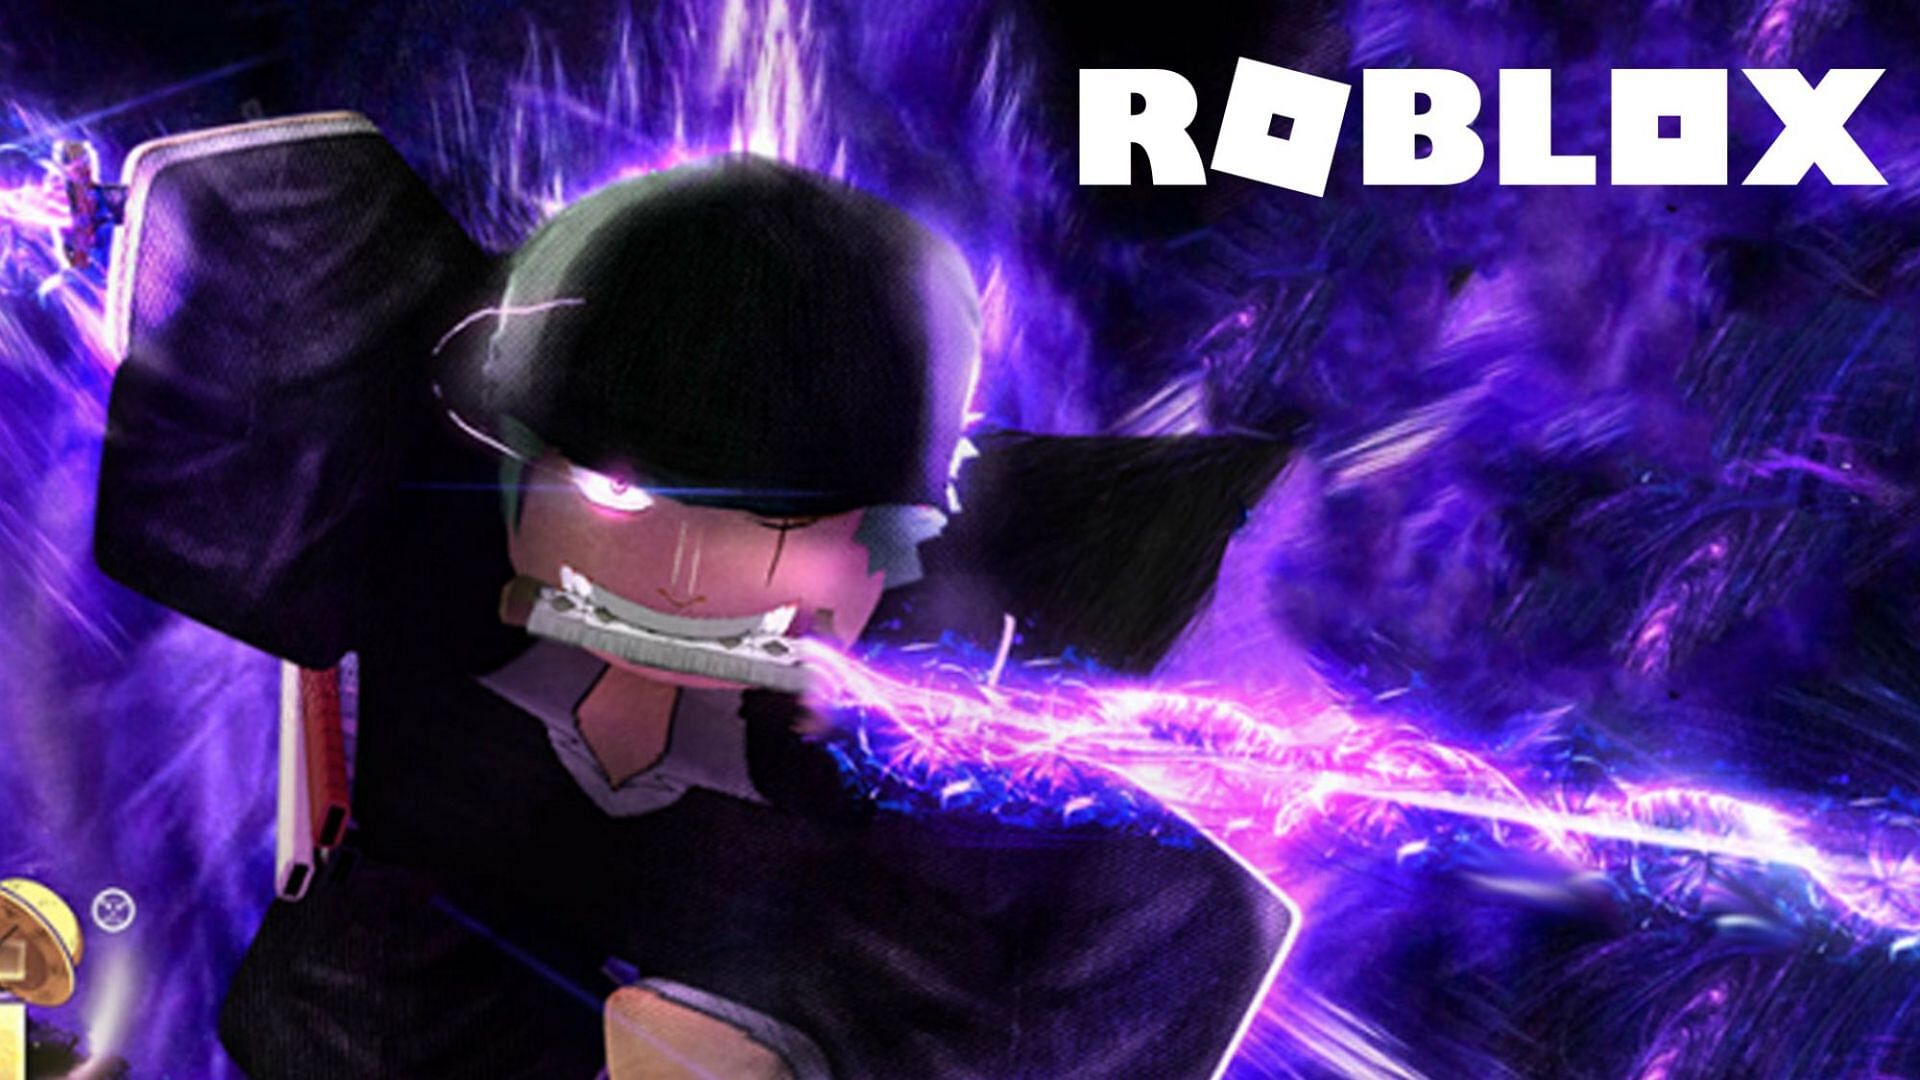 Roblox Games for fans of One Piece (Image from Roblox)